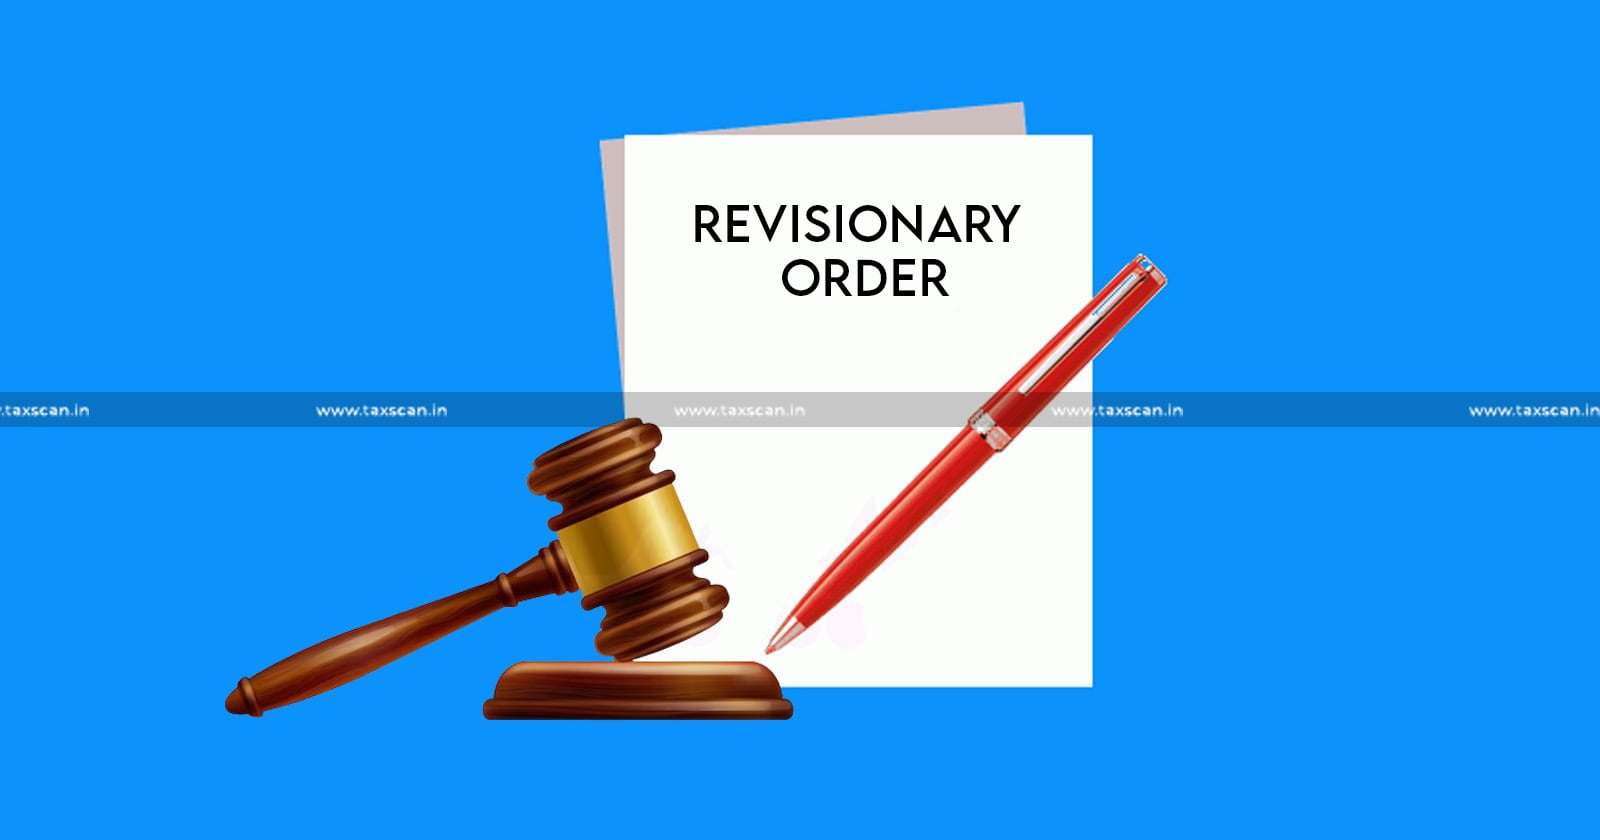 ITAT - ITAT Upholds Revisionary Order by AO - Revisionary Order - AO - Income Tax Act - Taxscan